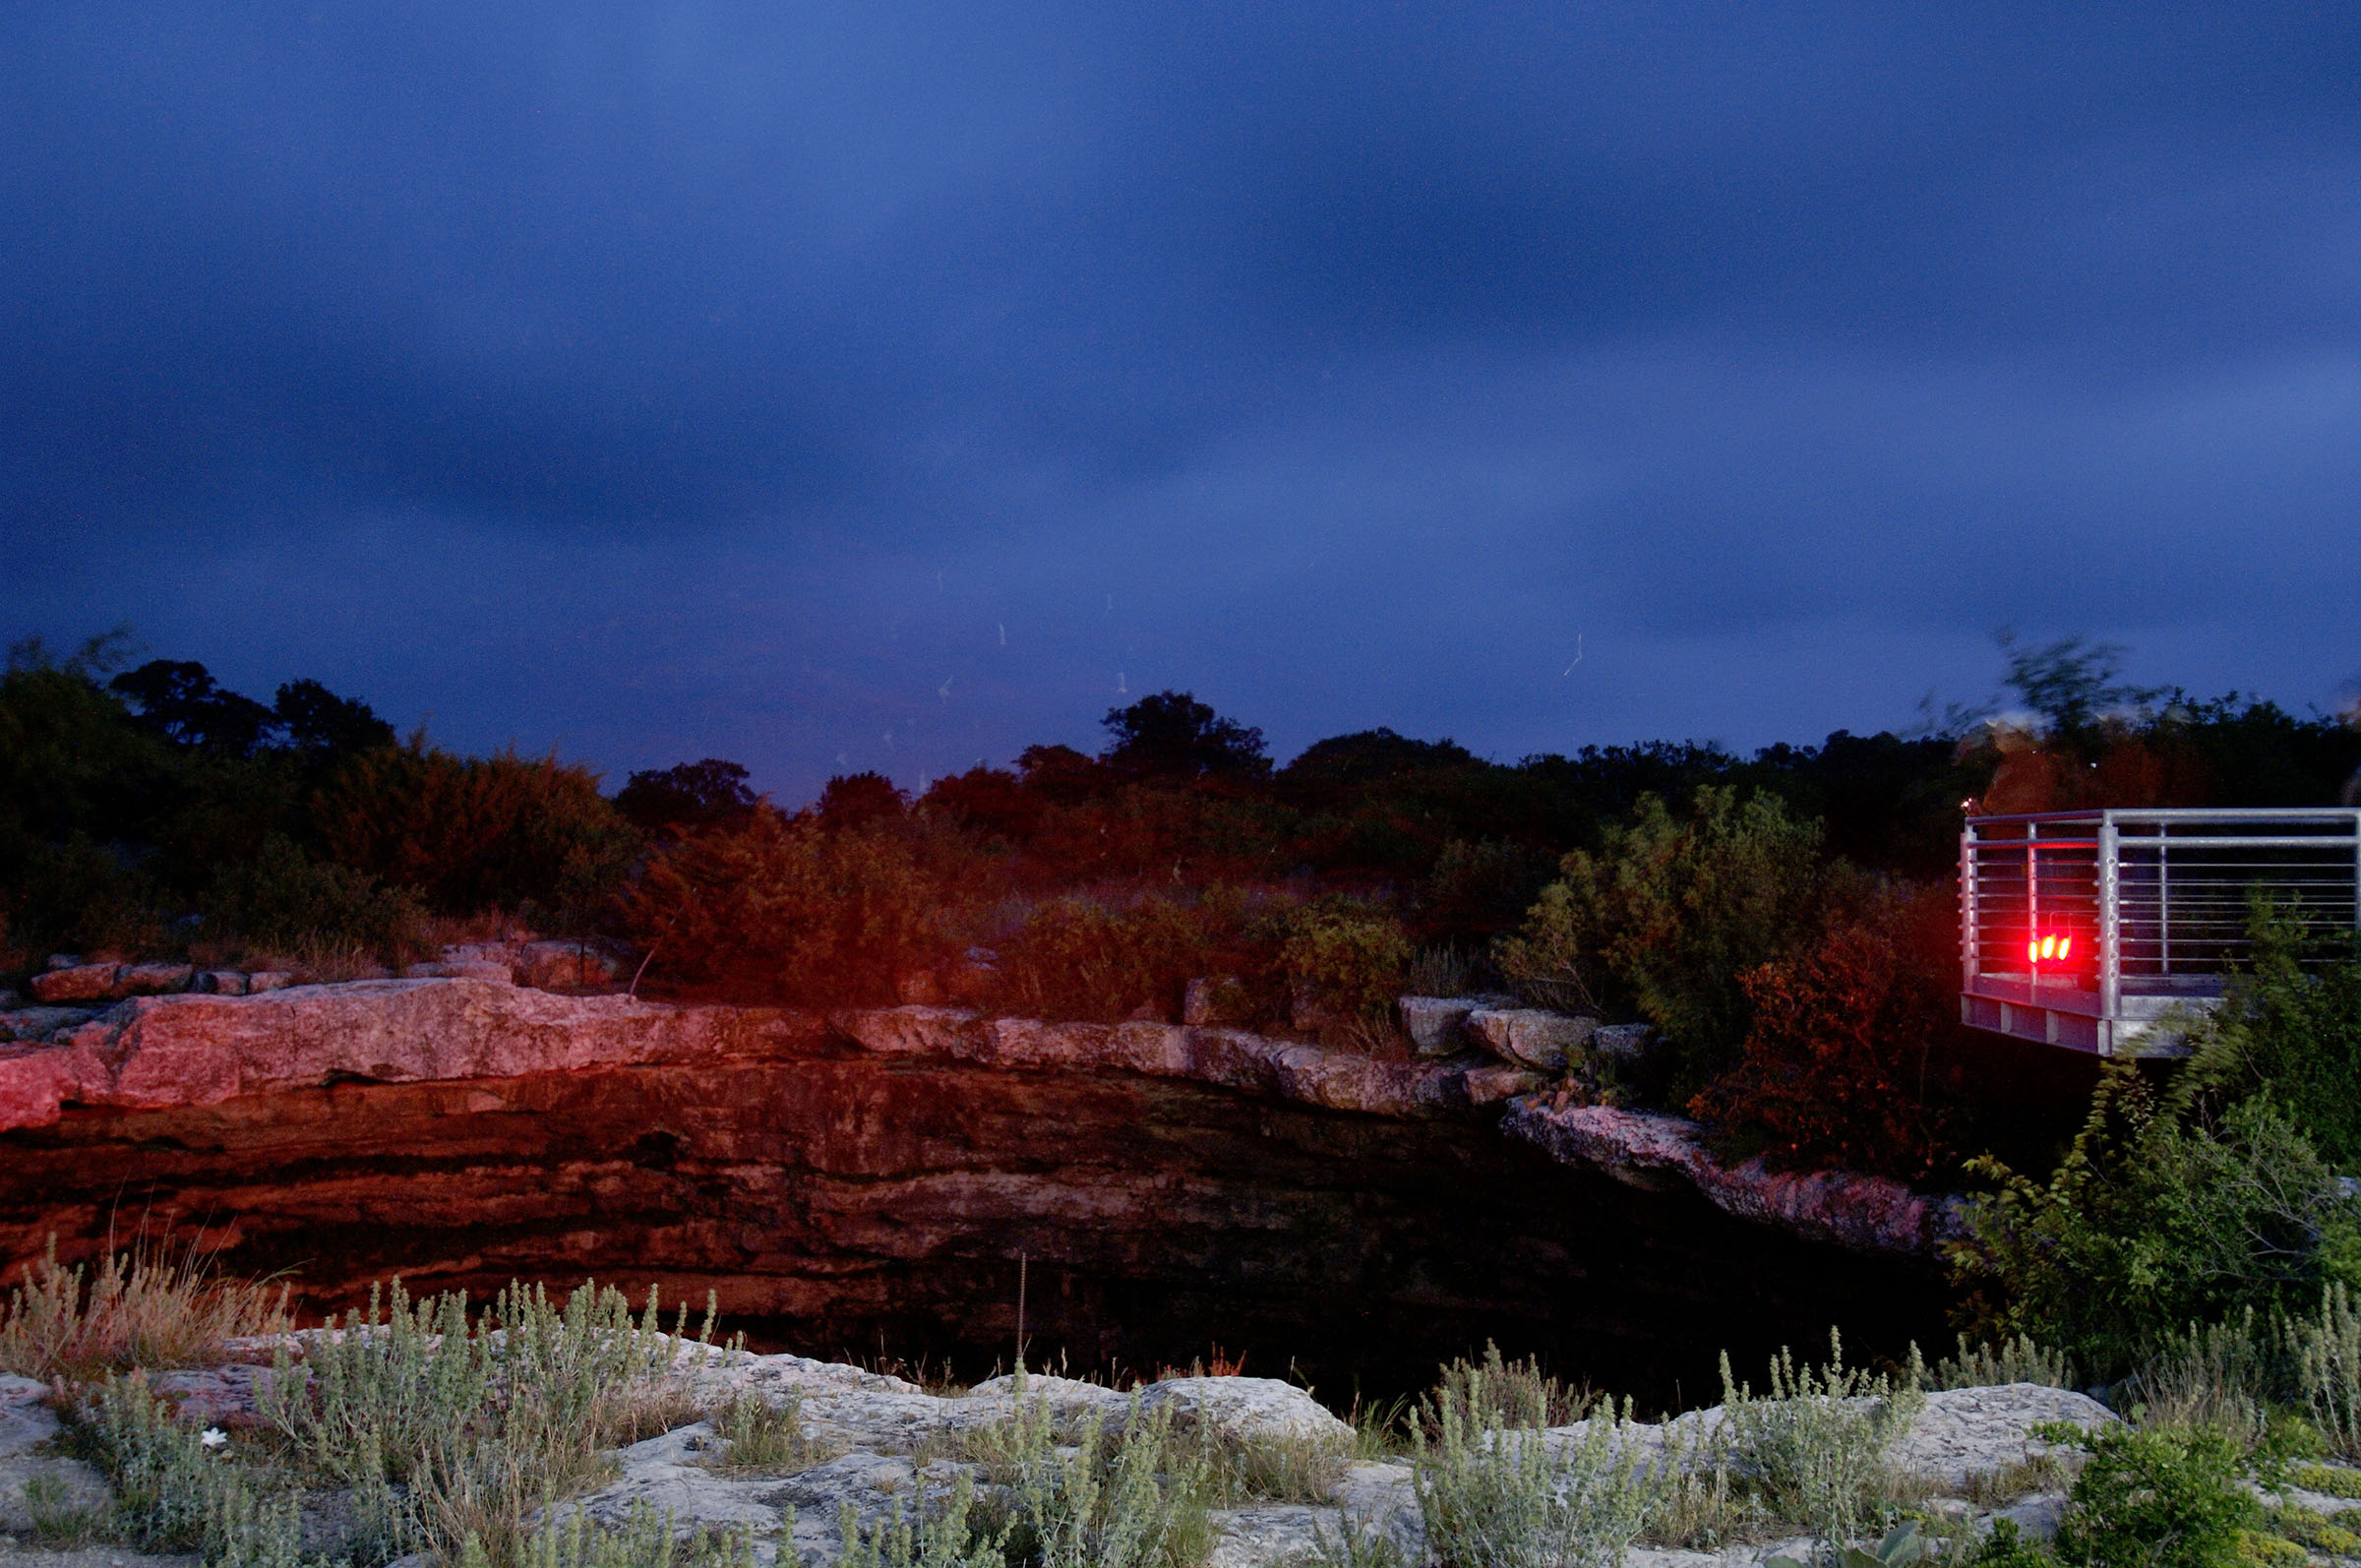 Red lights illuminate the side of a large hole in the limestone surrounded by short plants, under a dark blue dusk sky